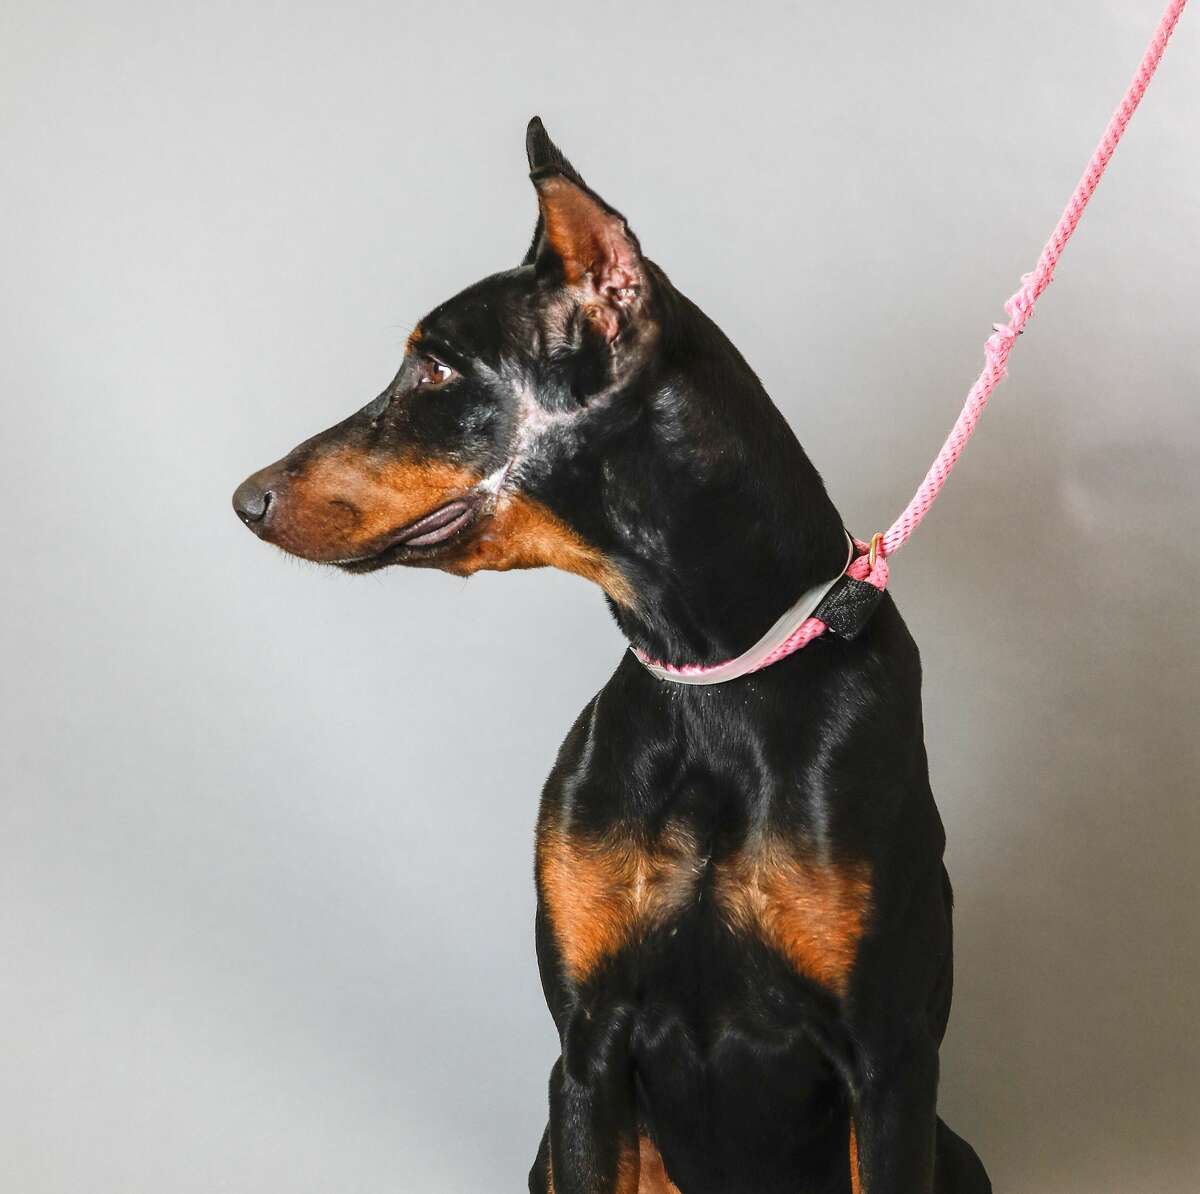 "Ali" caught the hearts of hundreds of Houstonians when he was rescued by the Harris County Animal Cruelty Taskforce in November after becoming a victim of animal cruelty. The three-year-old Doberman mix was attacked by another dog and suffered from severe facial wounds that were left untreated by his former owner. 